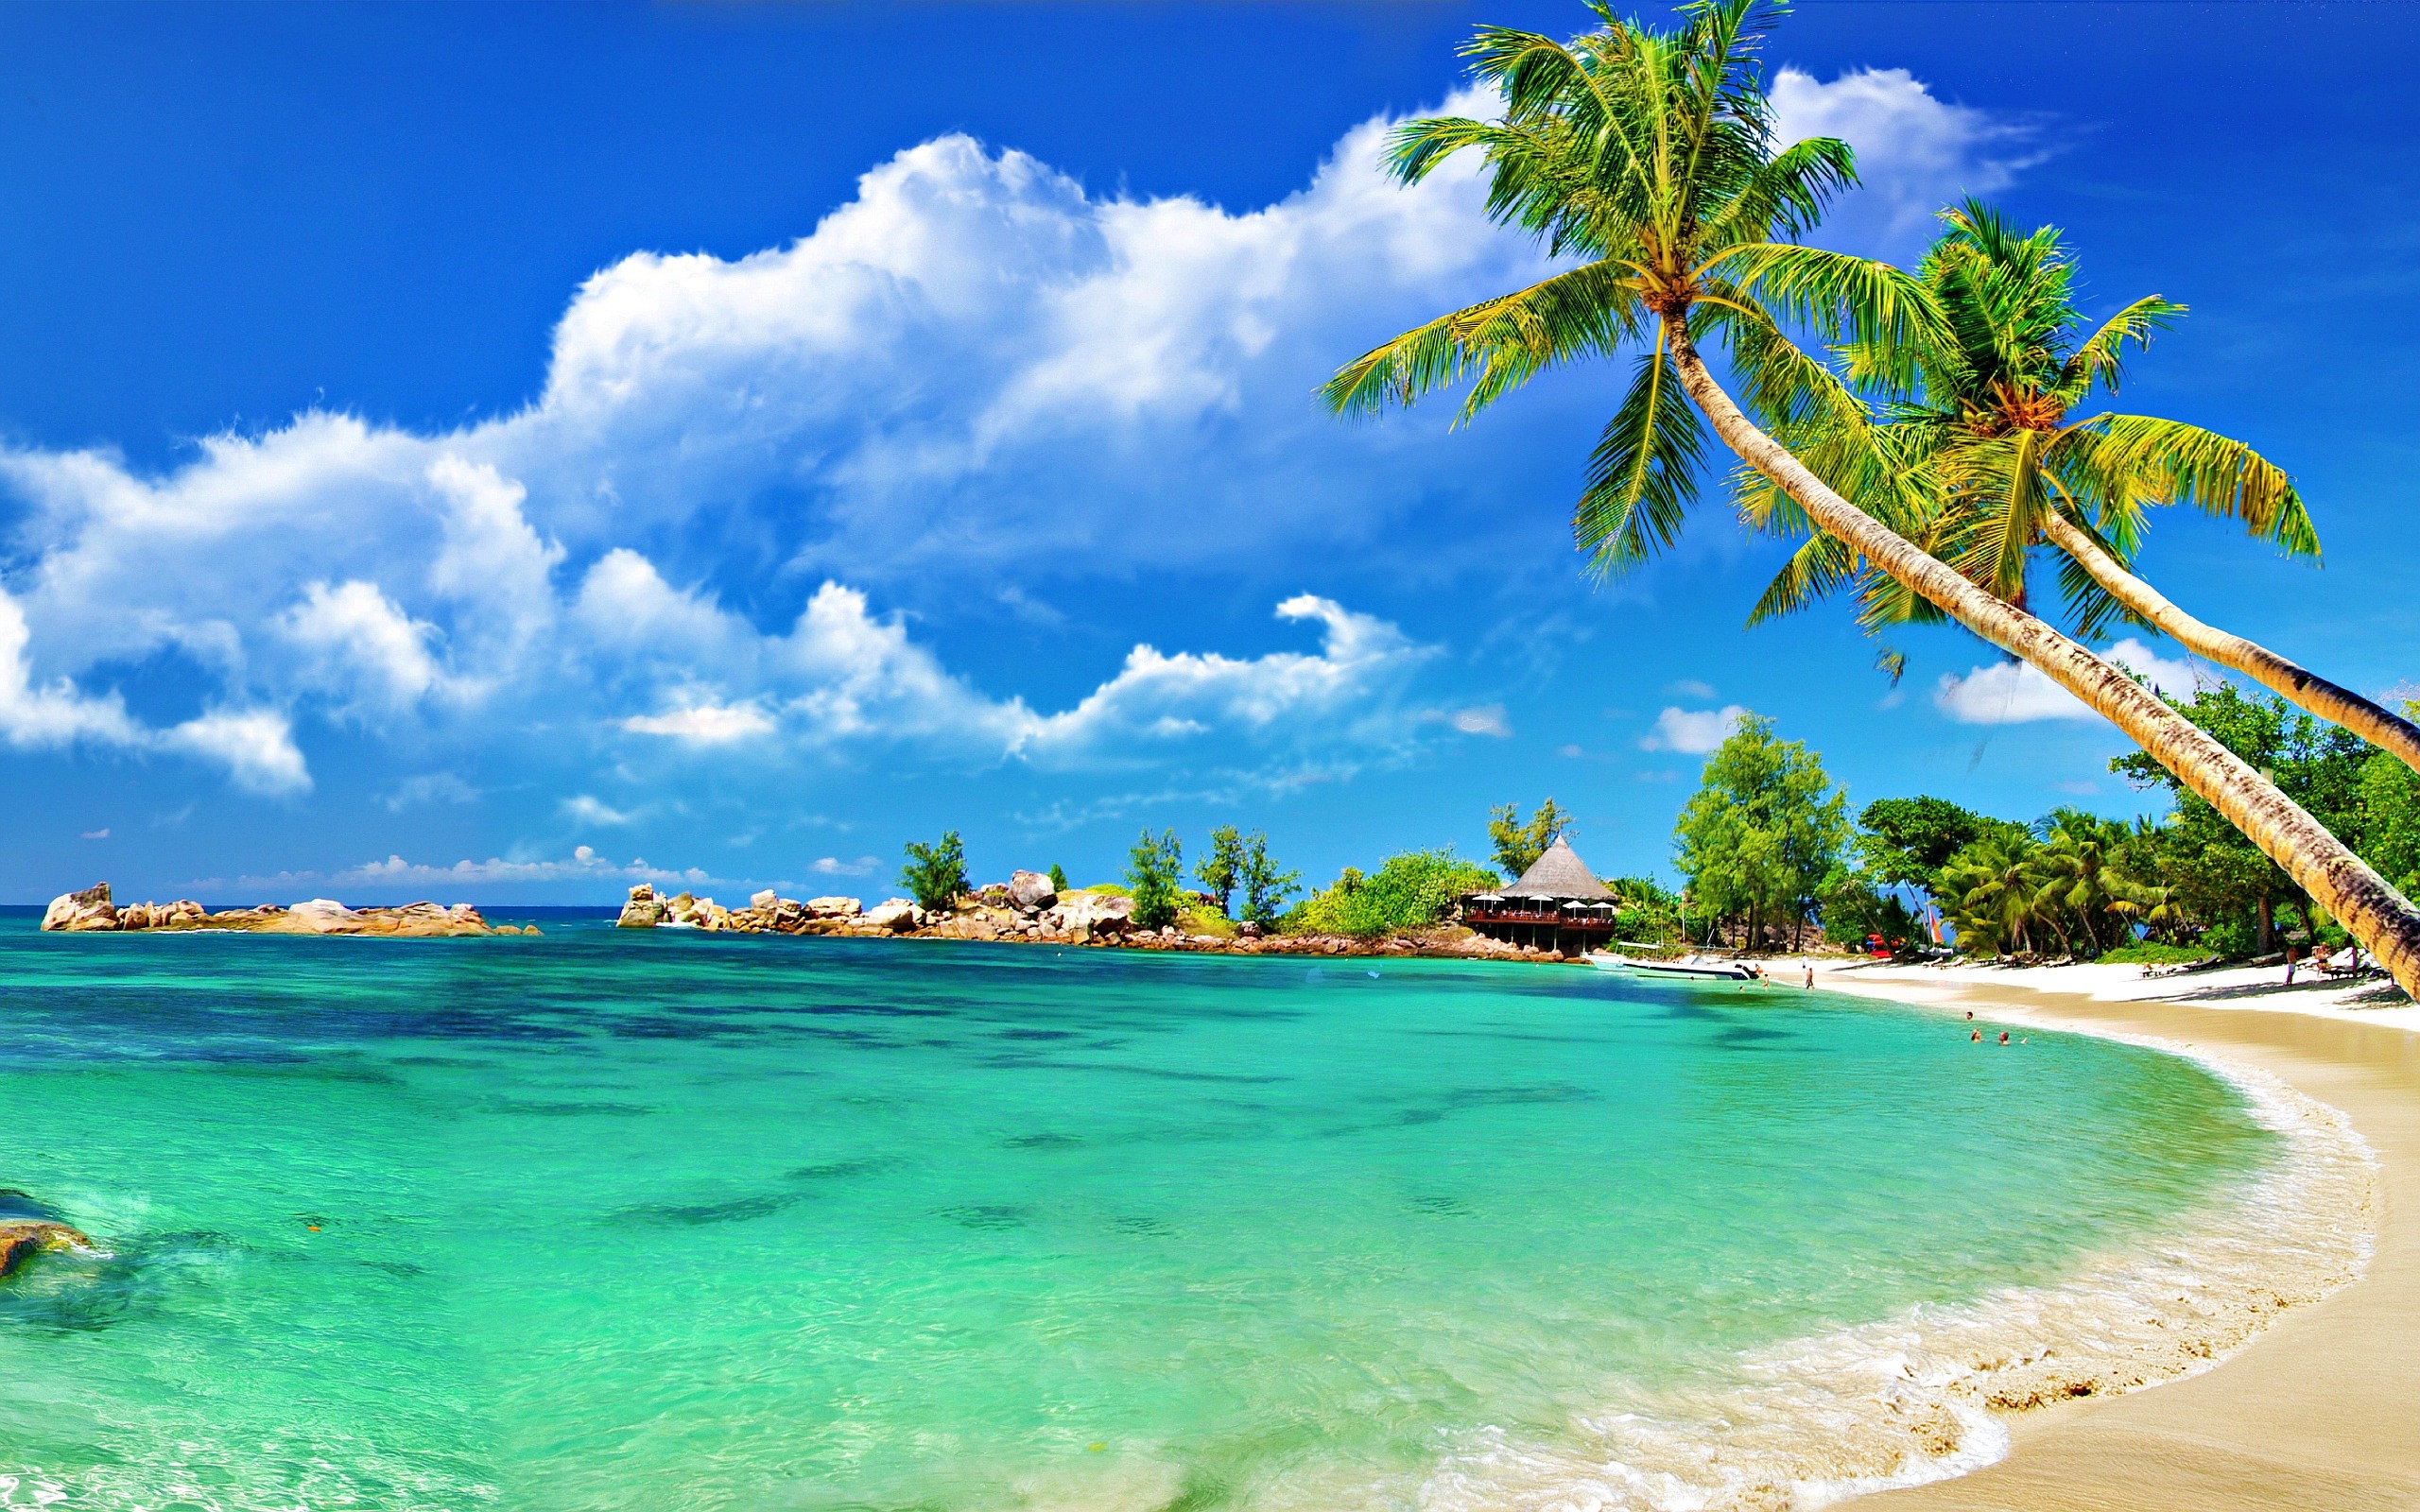 50 AMAZING BEACH WALLPAPERS FREE TO DOWNLOAD. Beach WallpaperHd